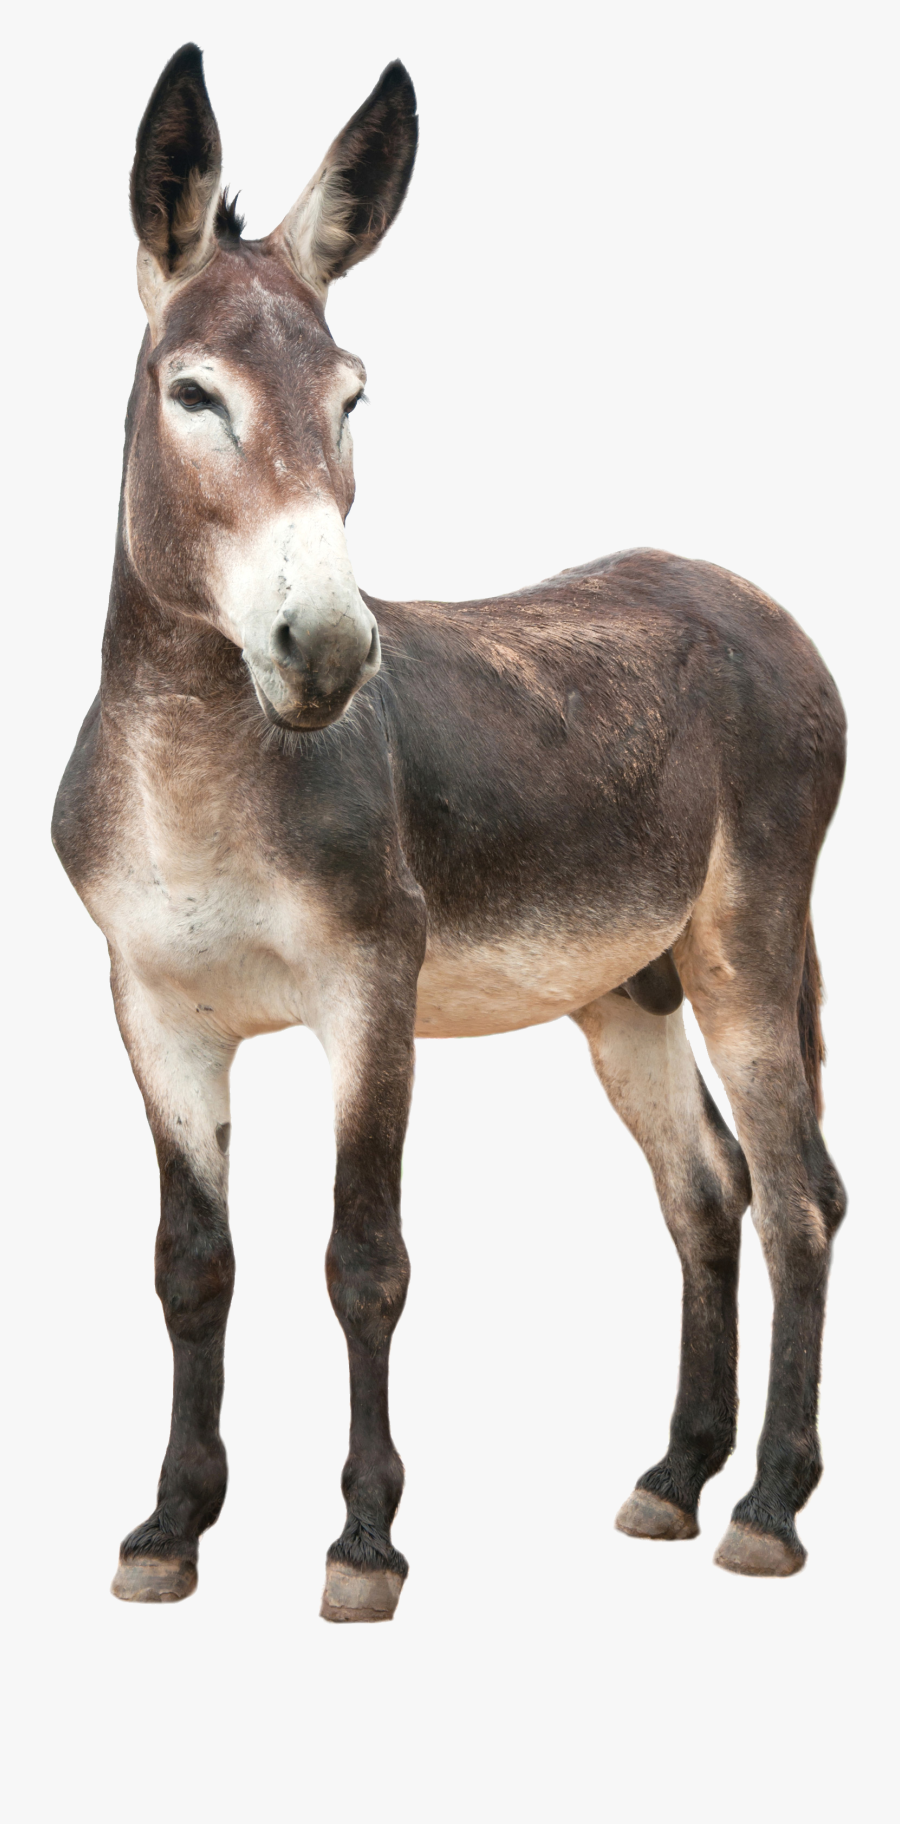 Donkey Png Images Free Download - Donkey Png, Transparent Clipart